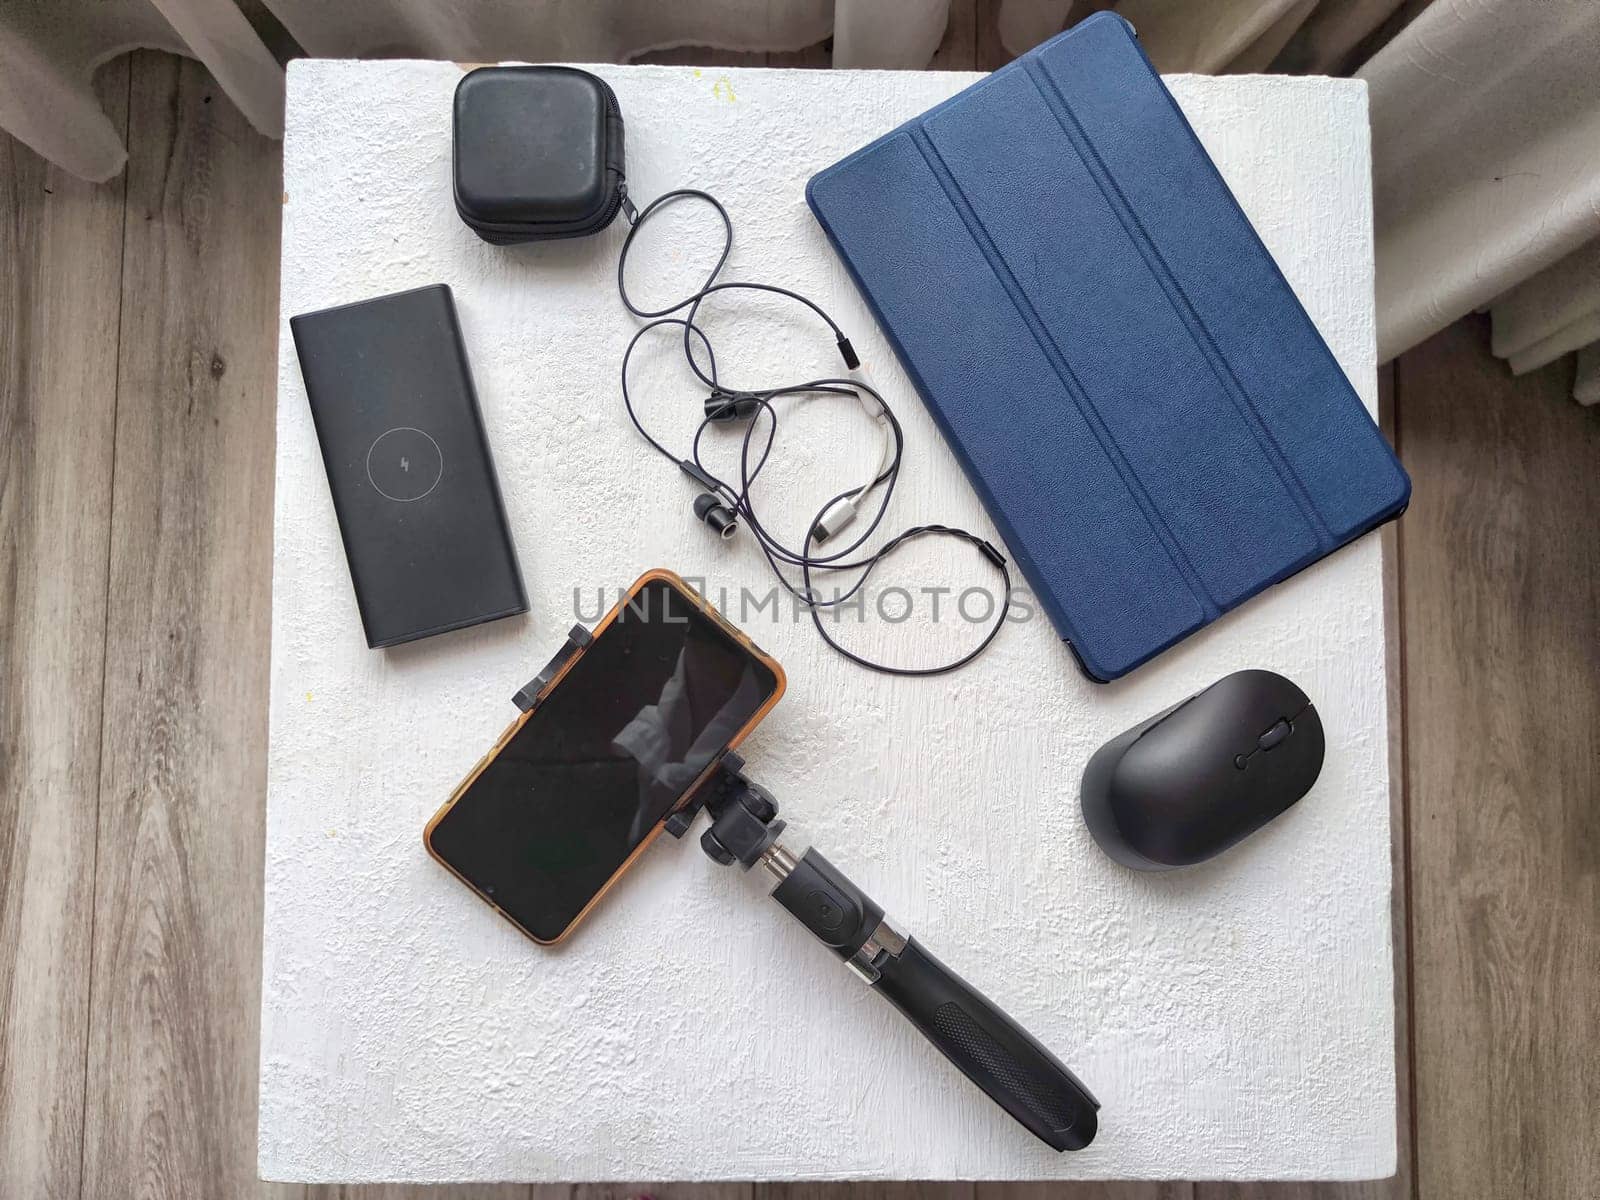 Modern Work Desk With Electronic Devices and Accessories. A set of useful blogger devices by keleny